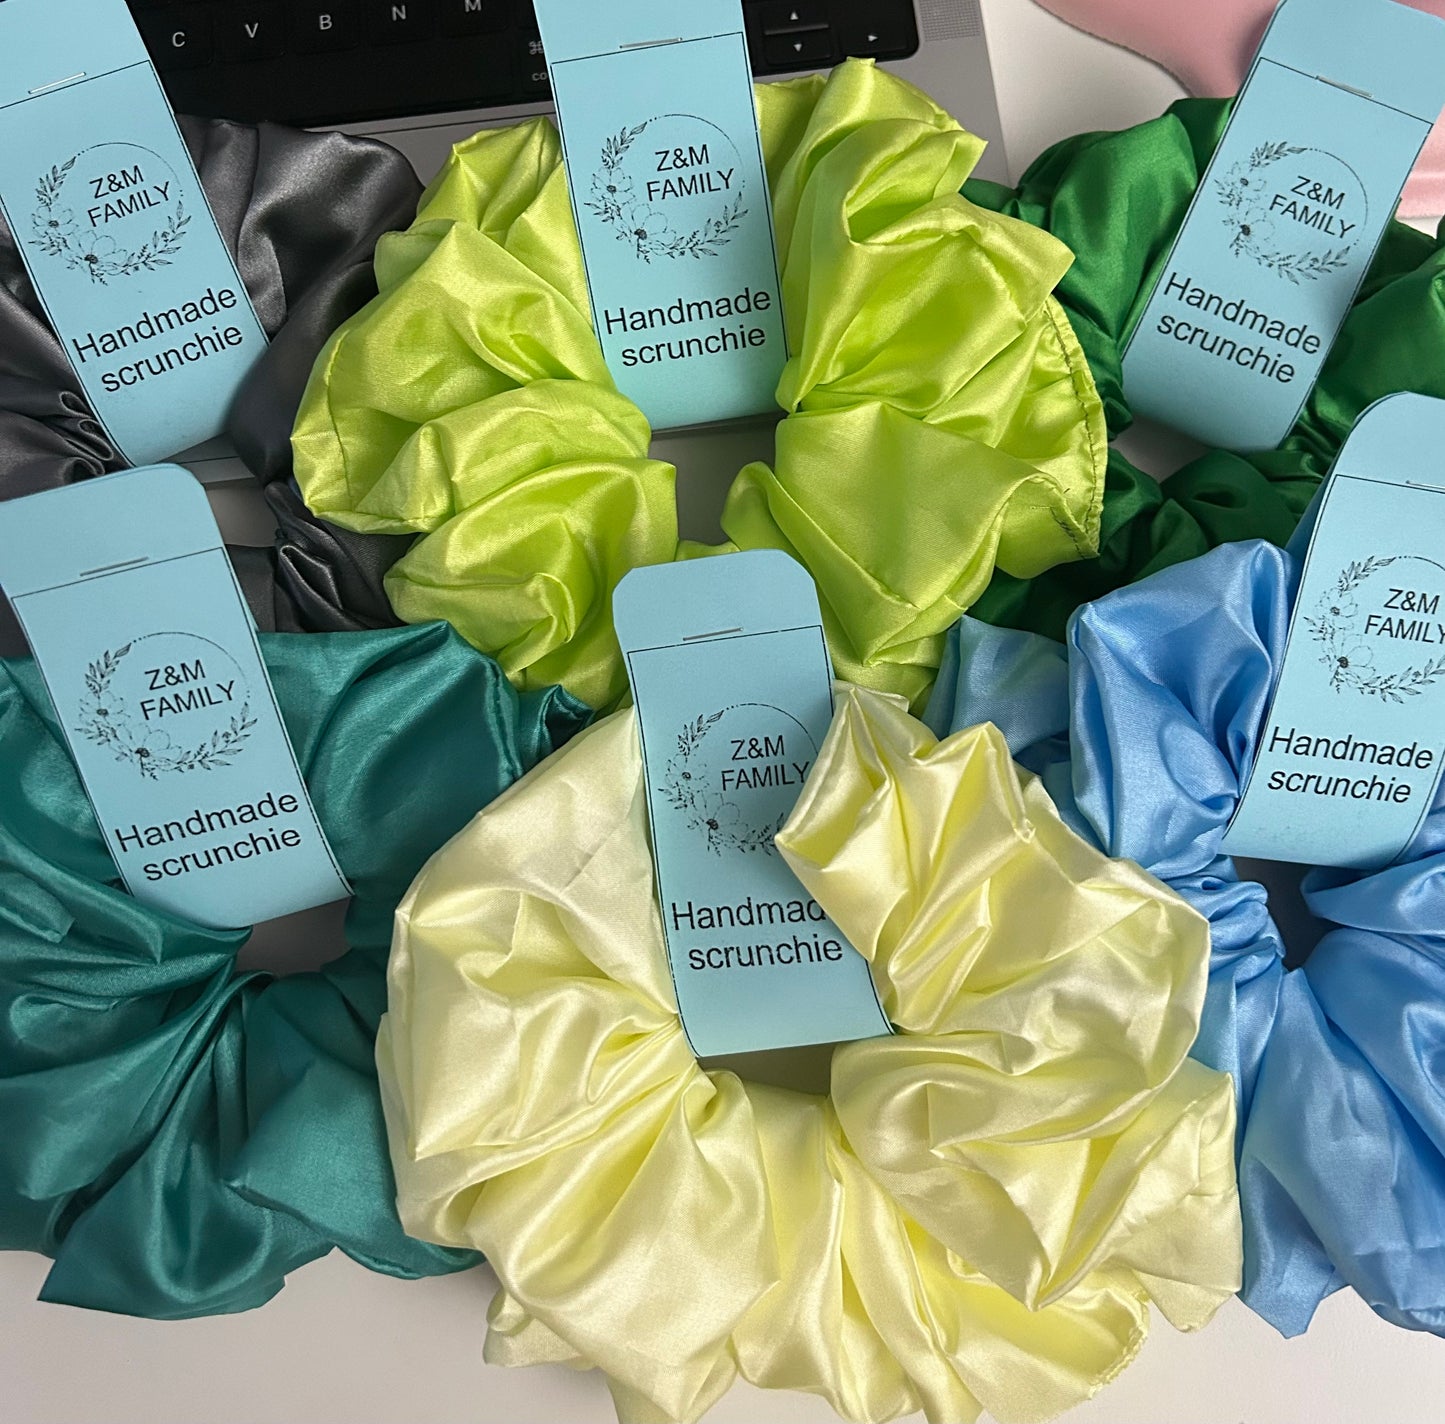 Silk, Satin Scrunchie - Large 20 Colors Available. Free scrunchie holder.